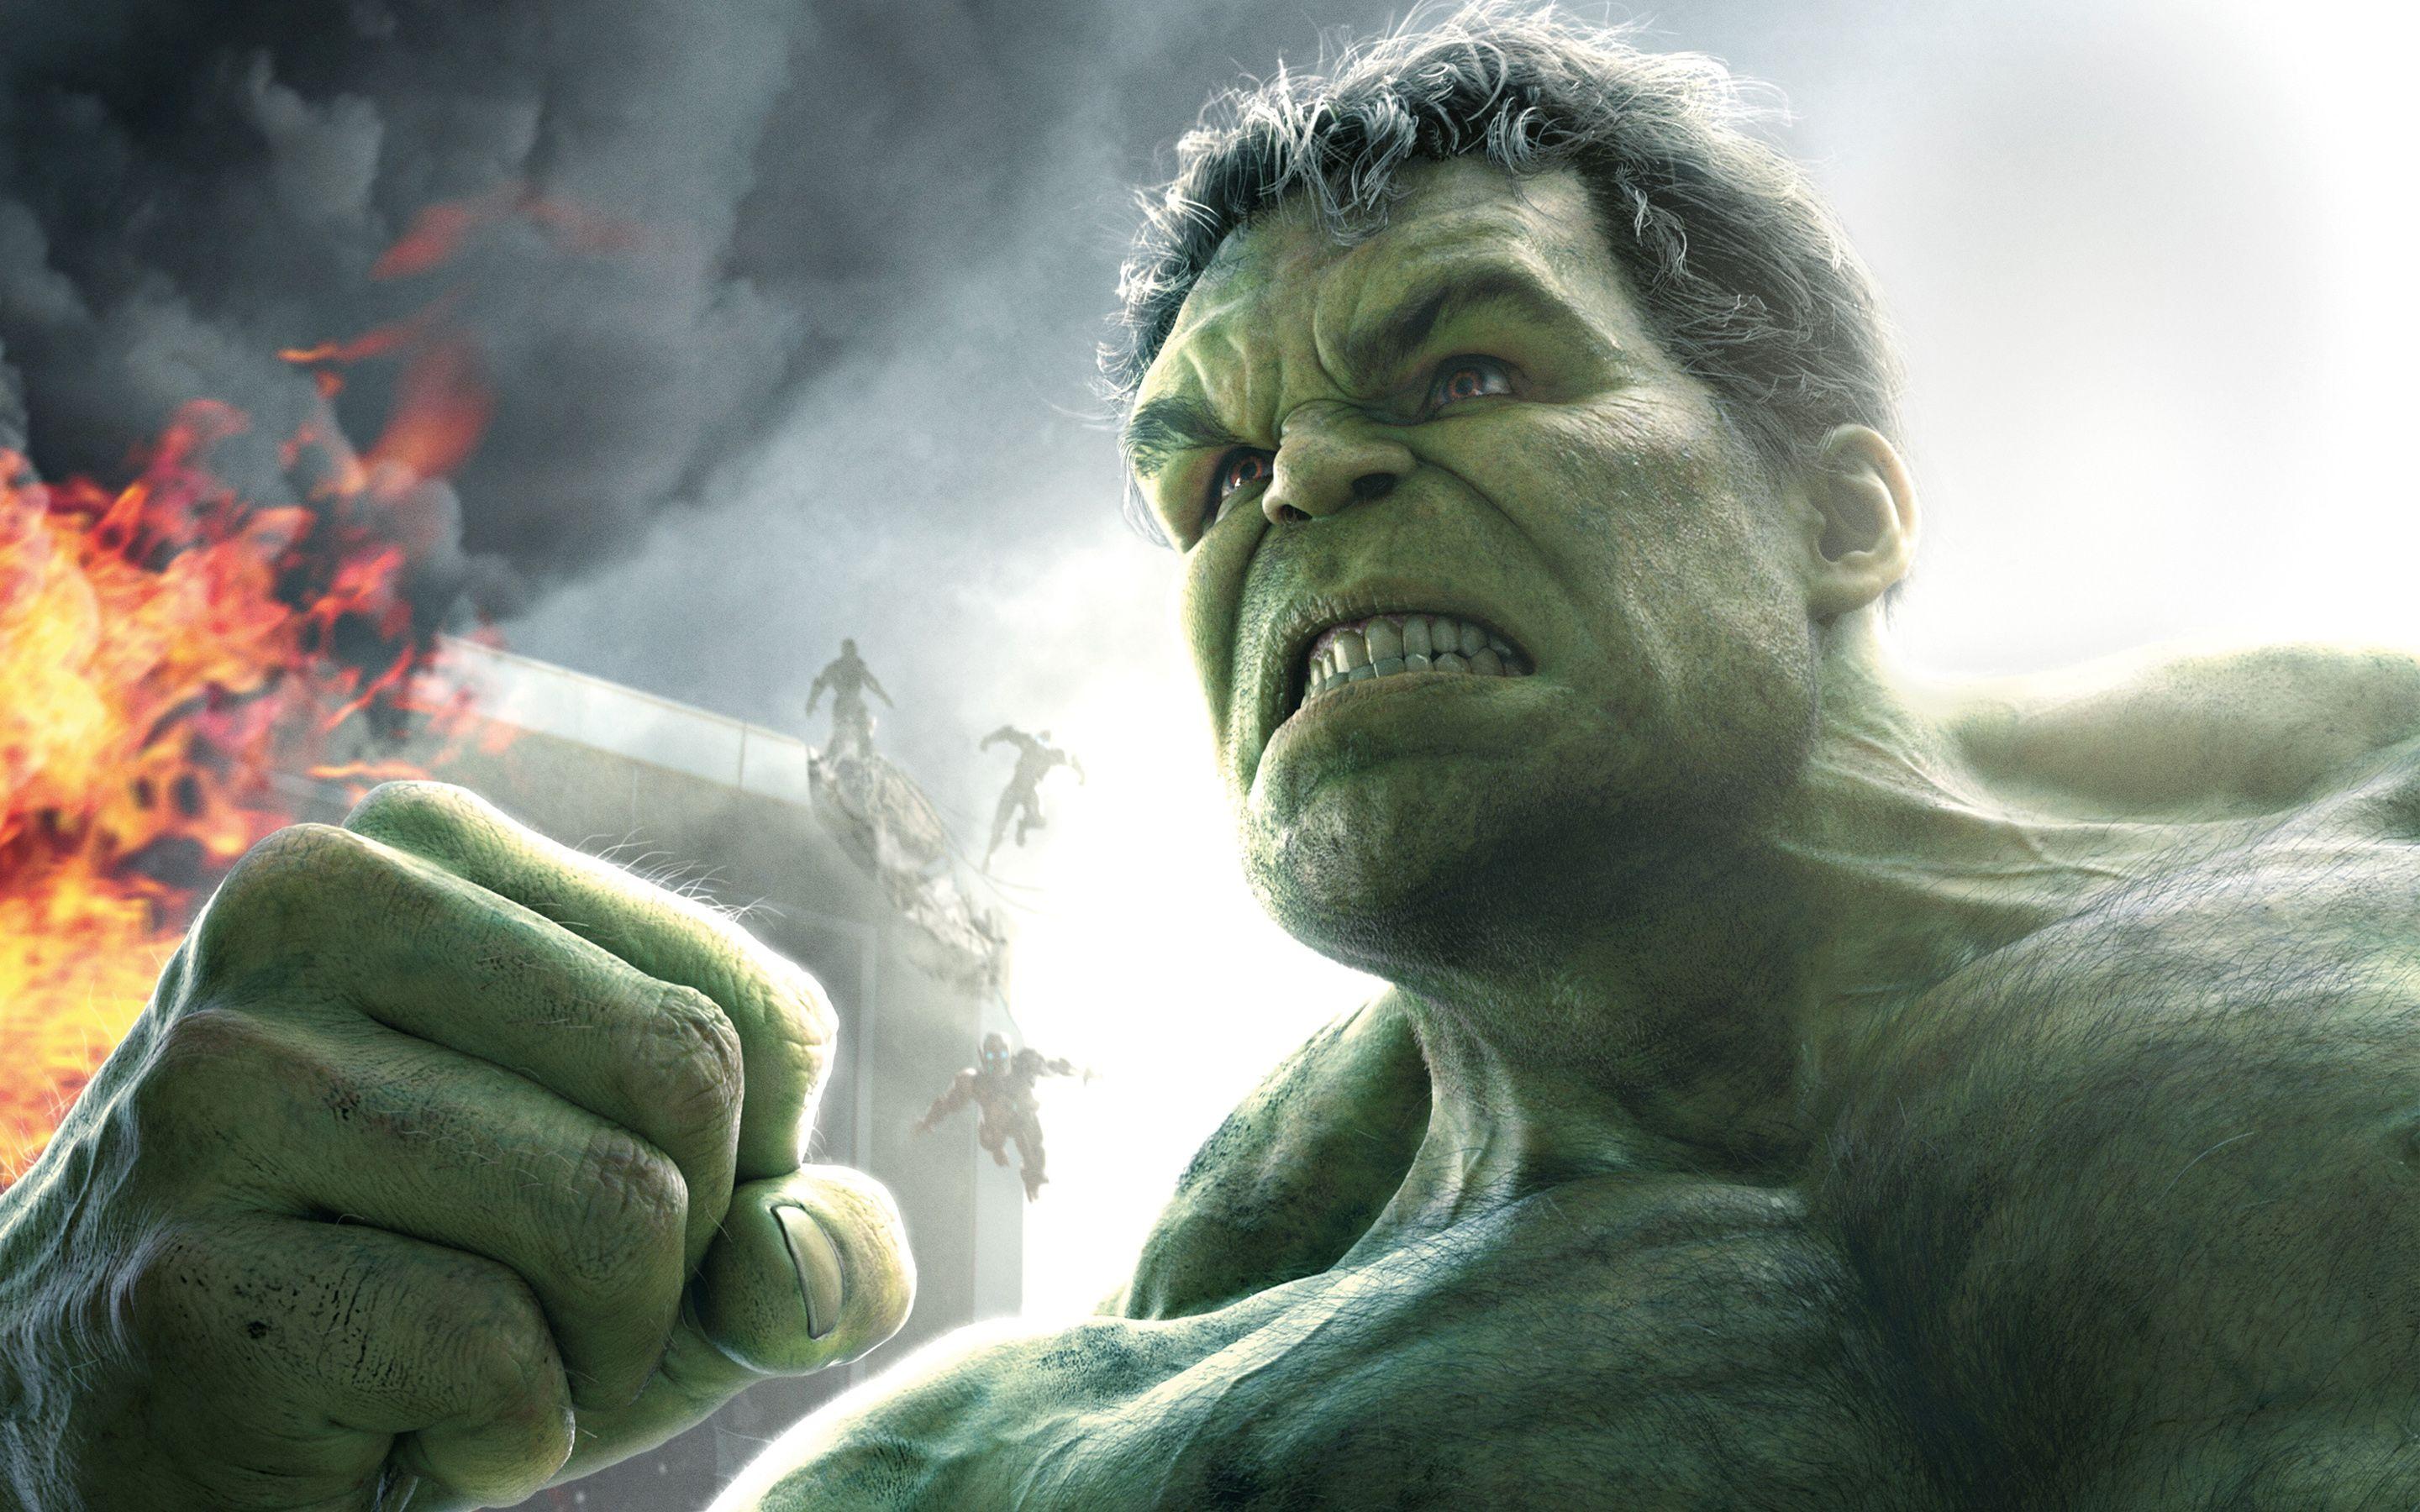 Incredible Hulk Wallpapers 78 pictures